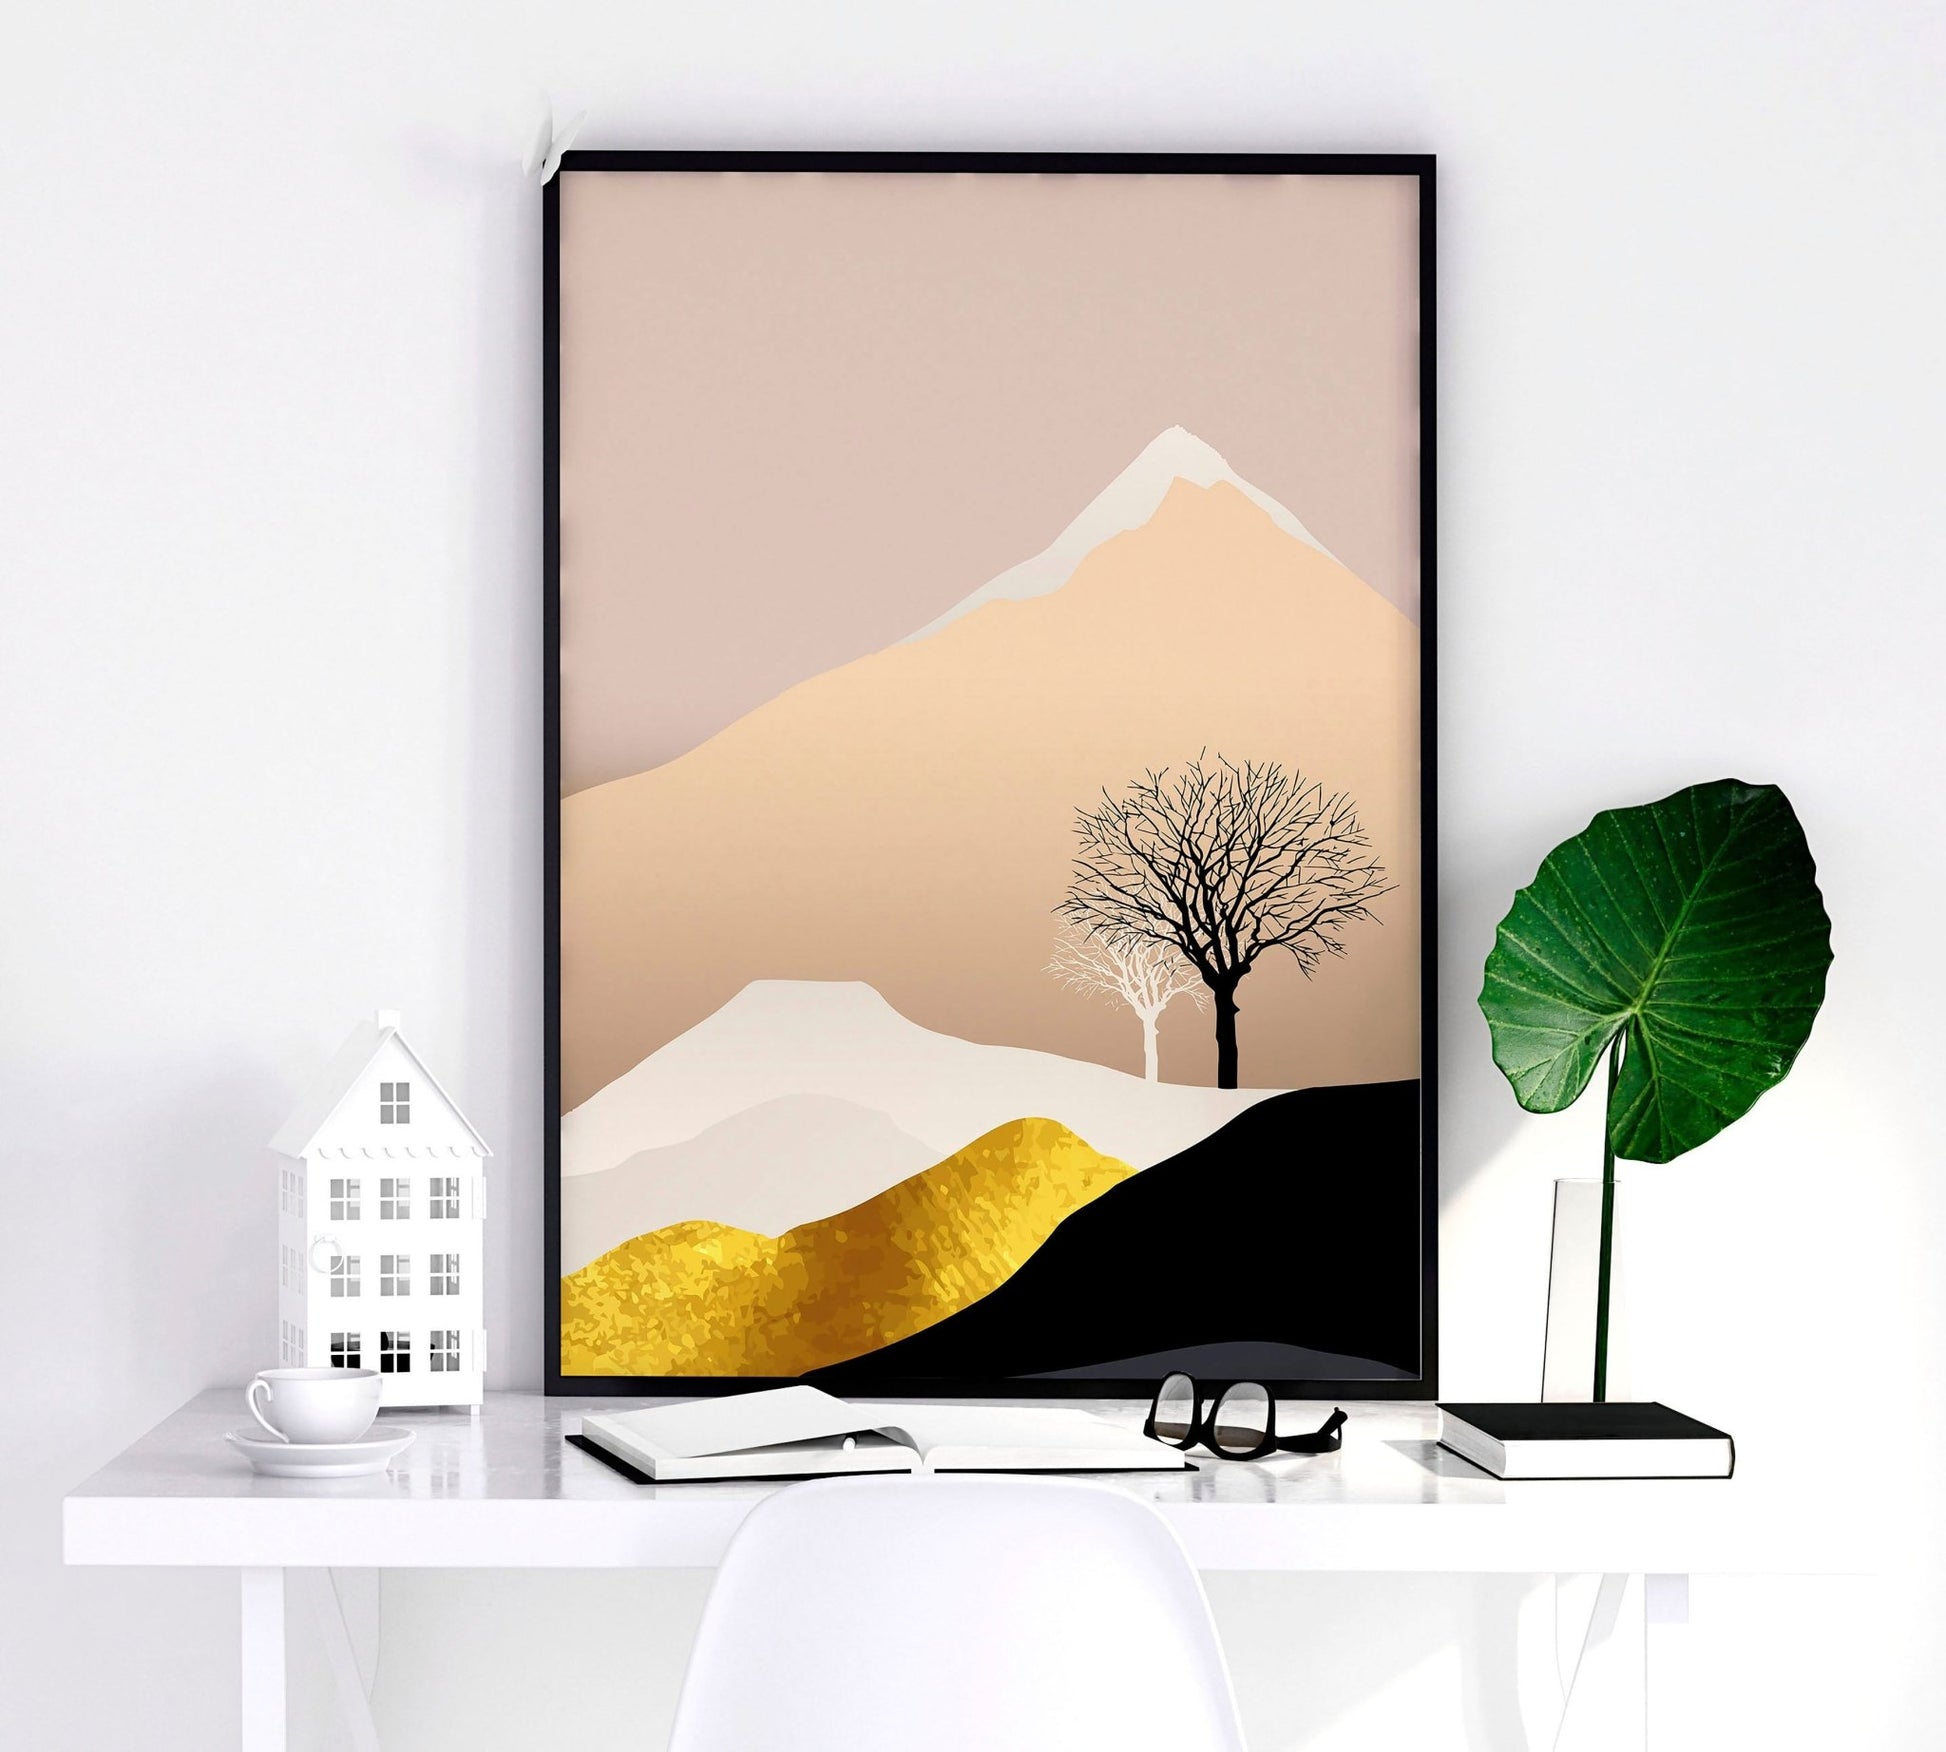 Nordic modern artwork for living room | set of 3 wall art prints - About Wall Art